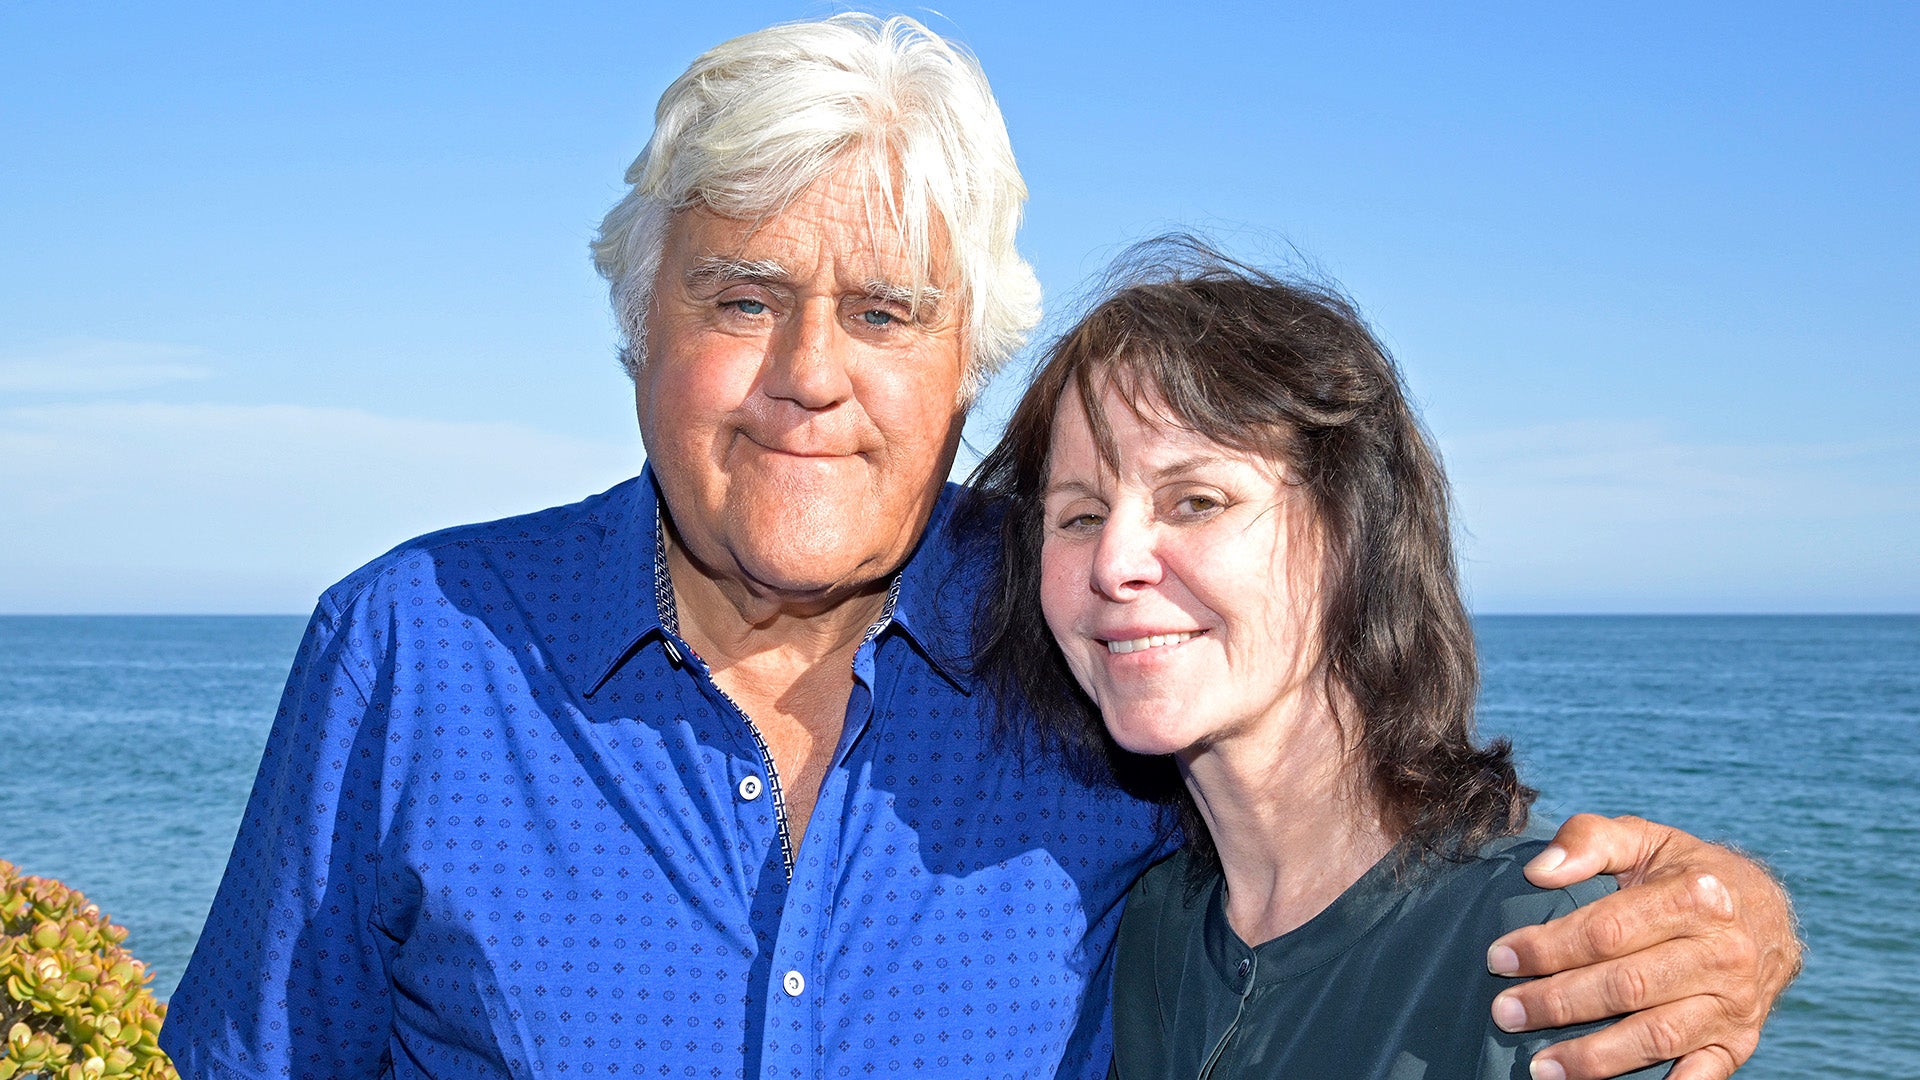 Jay Leno Spotted Out With Wife for First Time Since Revealing Her Struggle With Dementia